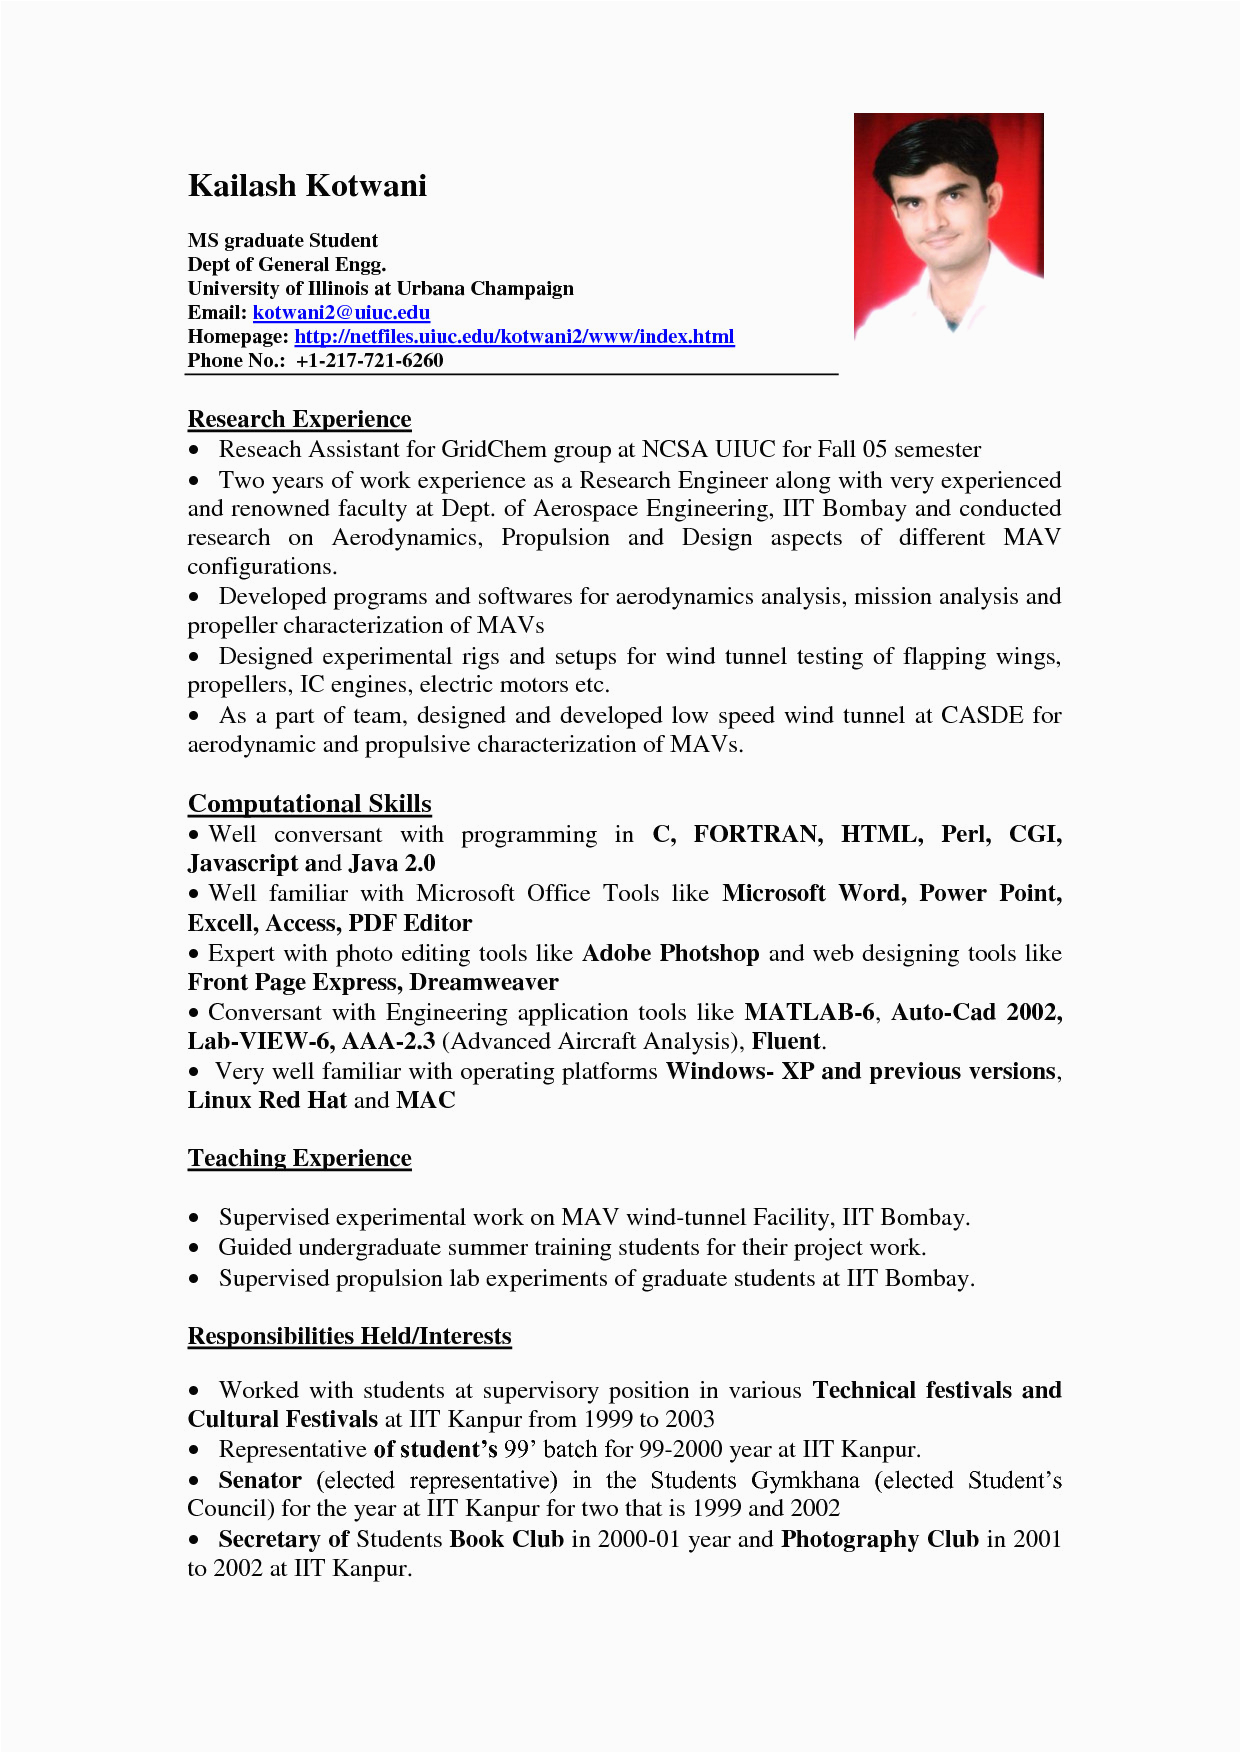 Resume Templates for Students with Little Experience Sample Resume for Working Students with No Work Experience